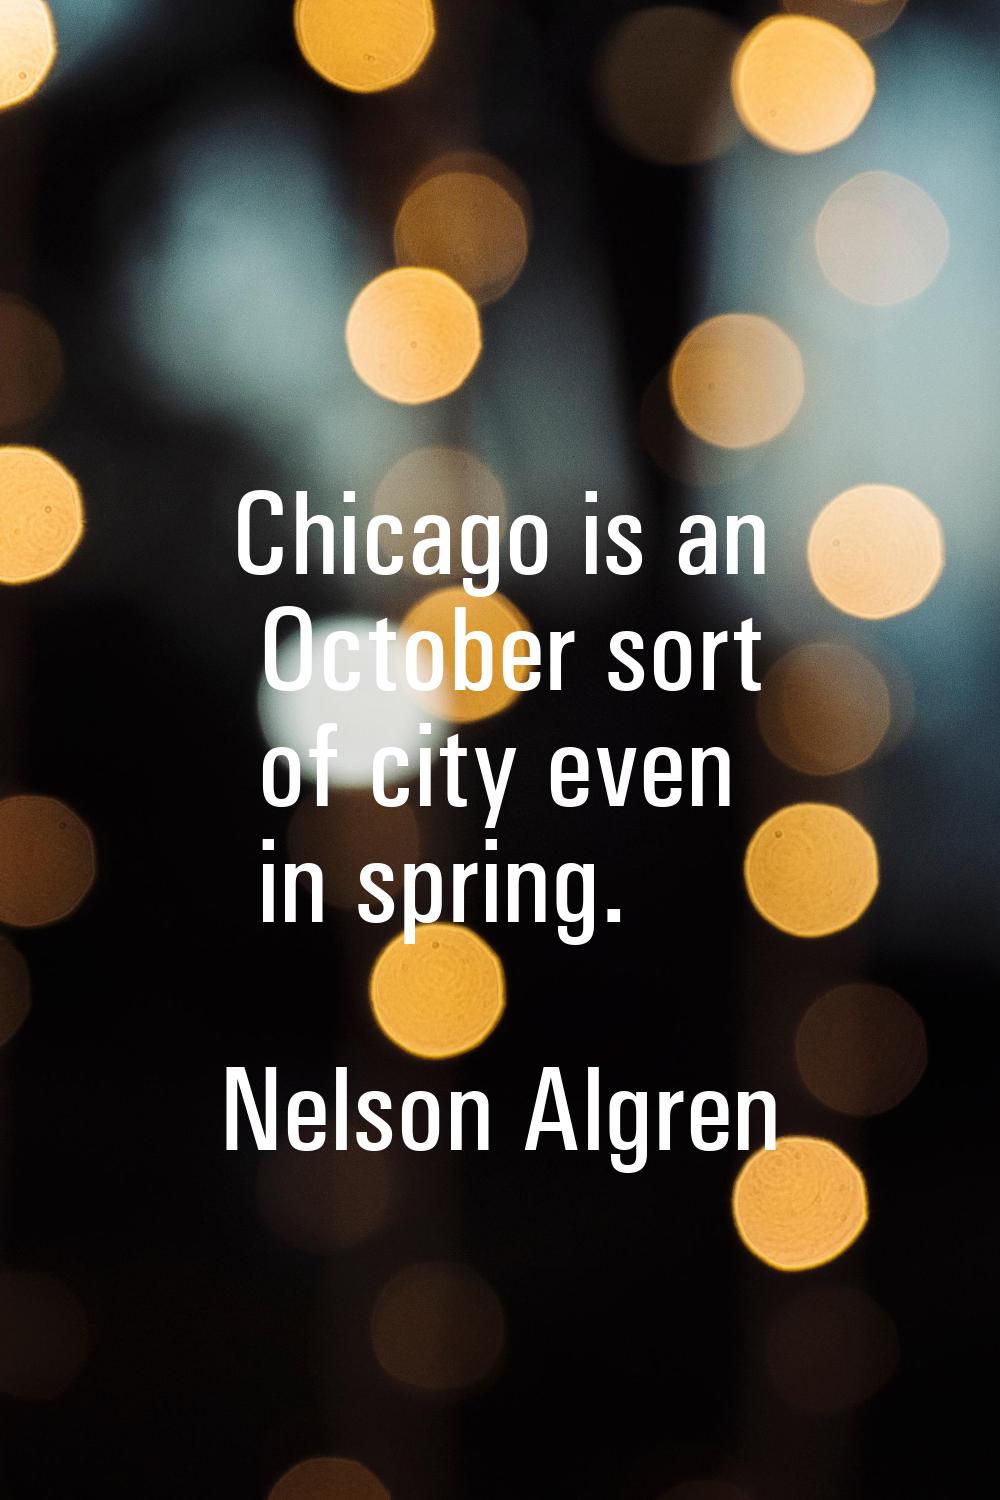 Chicago is an October sort of city even in spring.